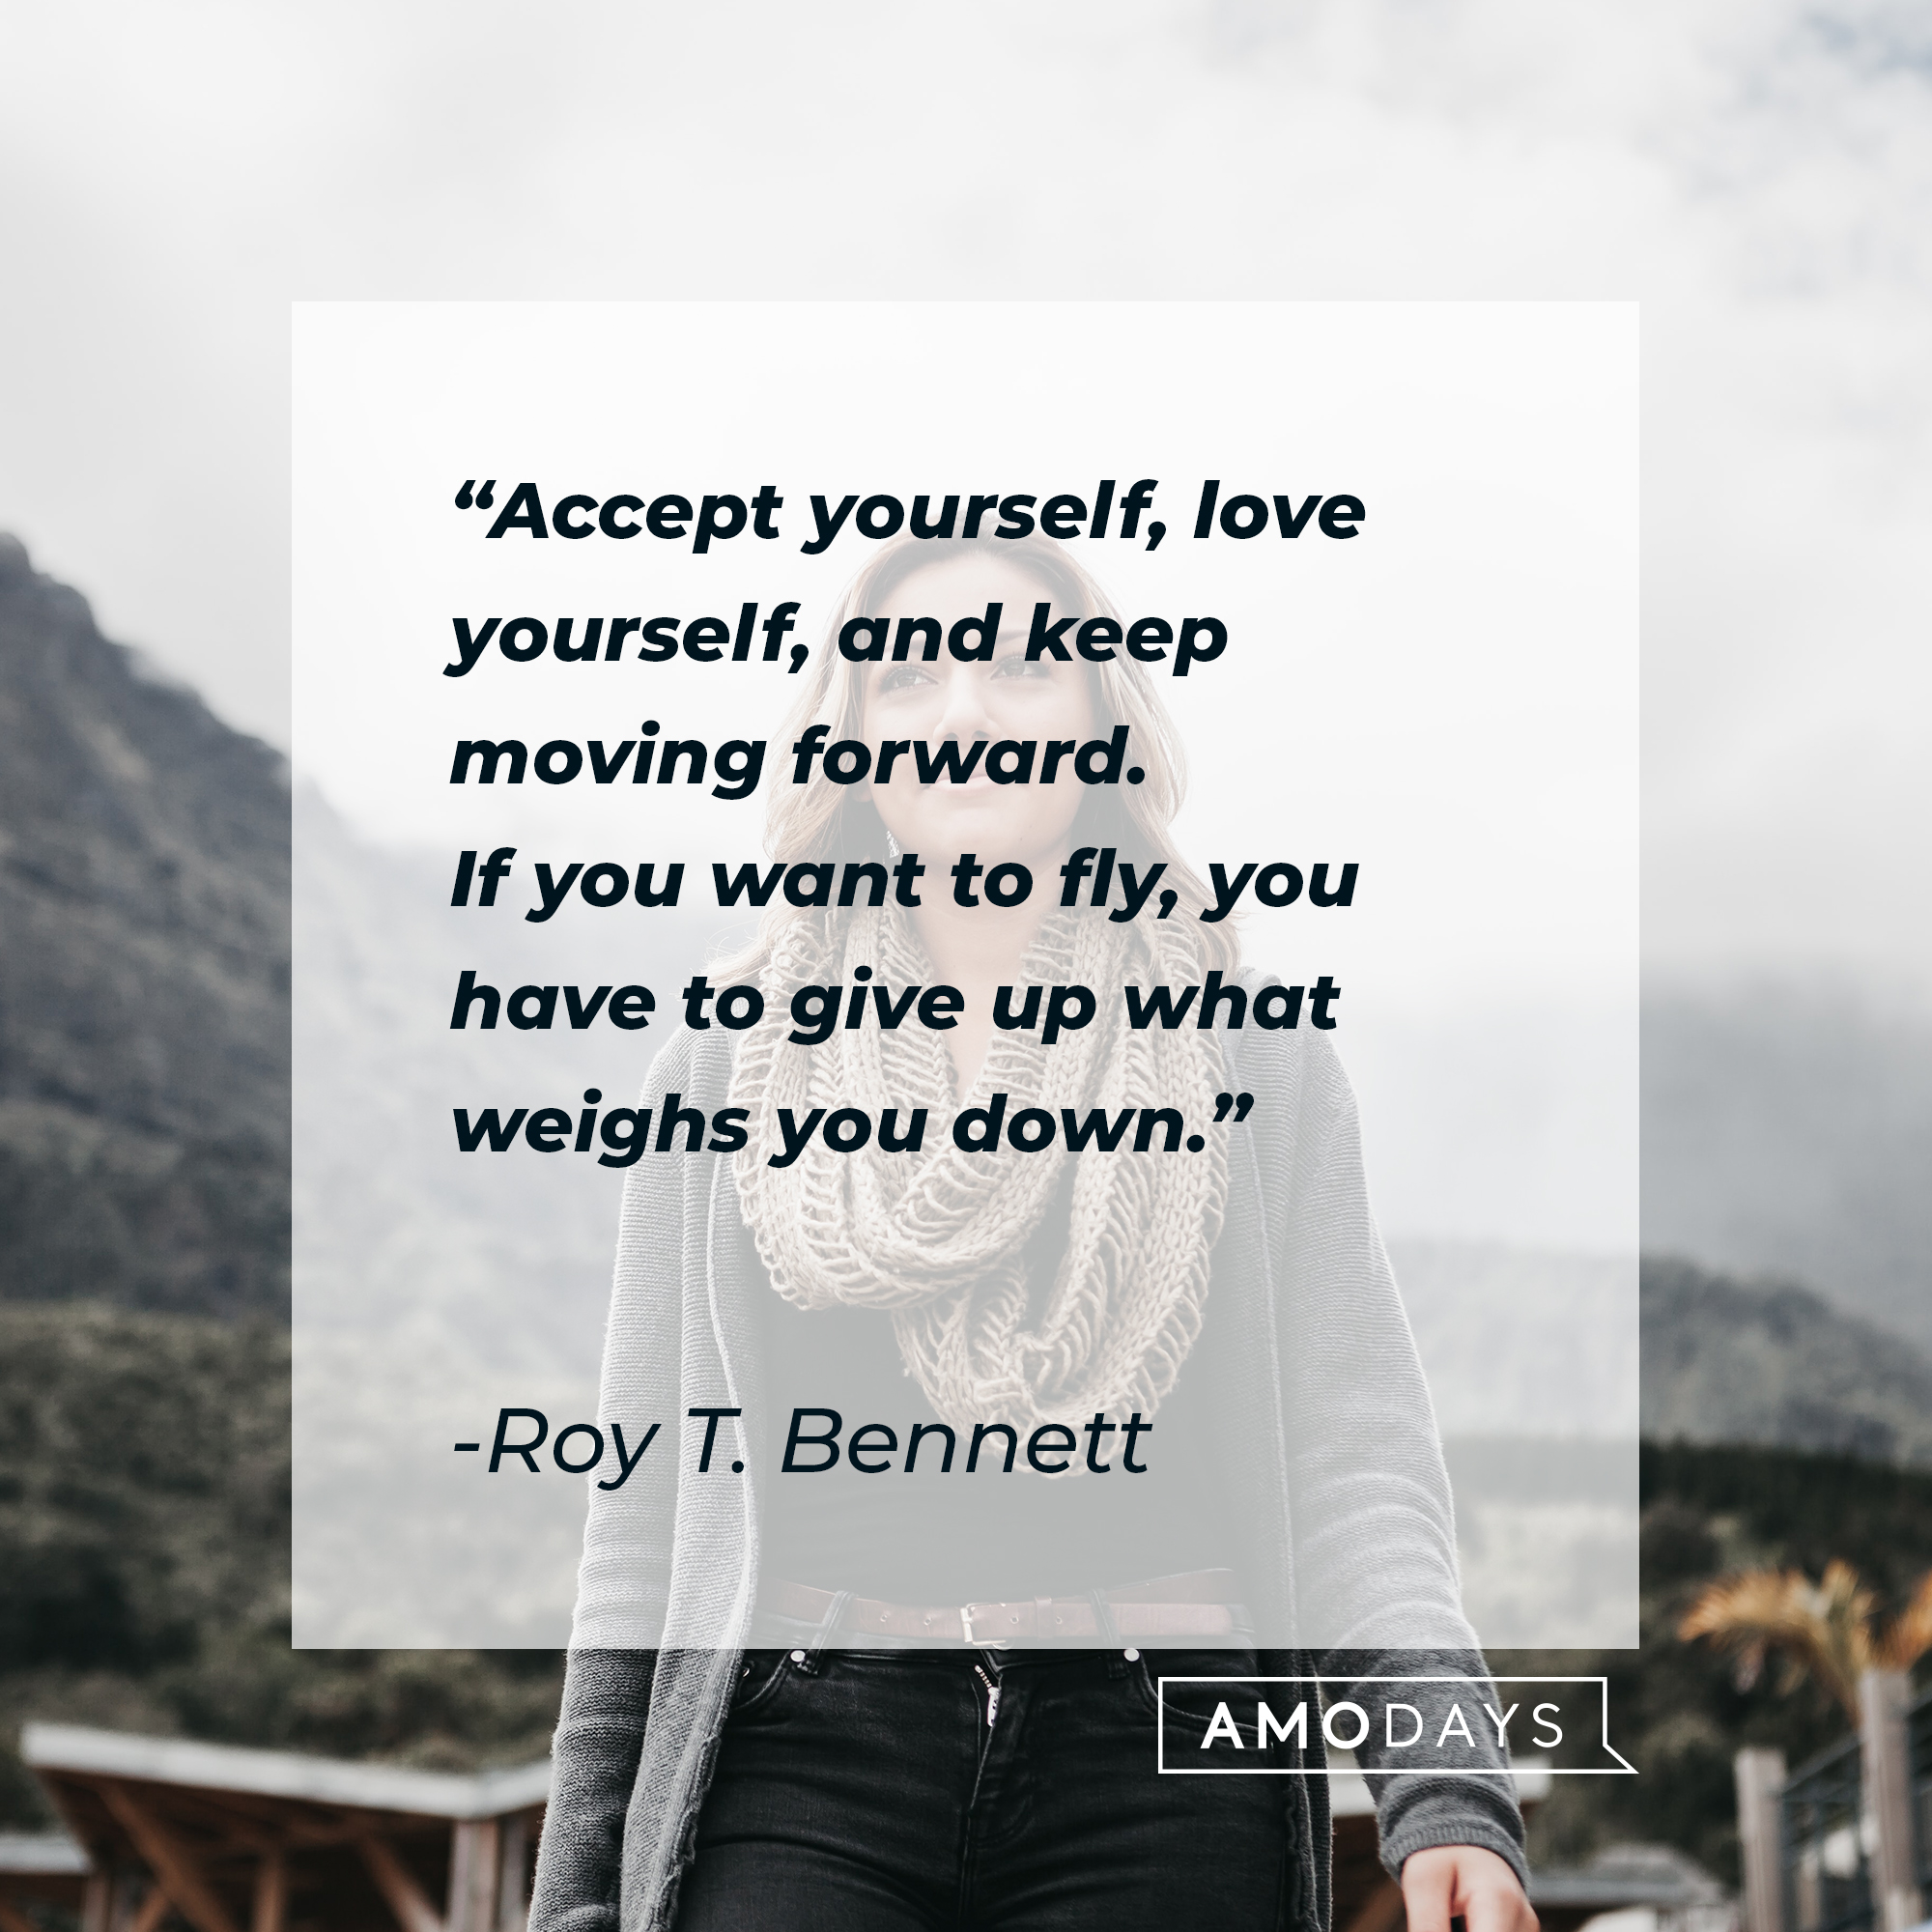 Roy T. Bennett's quote: "Accept yourself, love yourself, and keep moving forward. If you want to fly, you have to give up what weighs you down." | Image: Unsplash.com